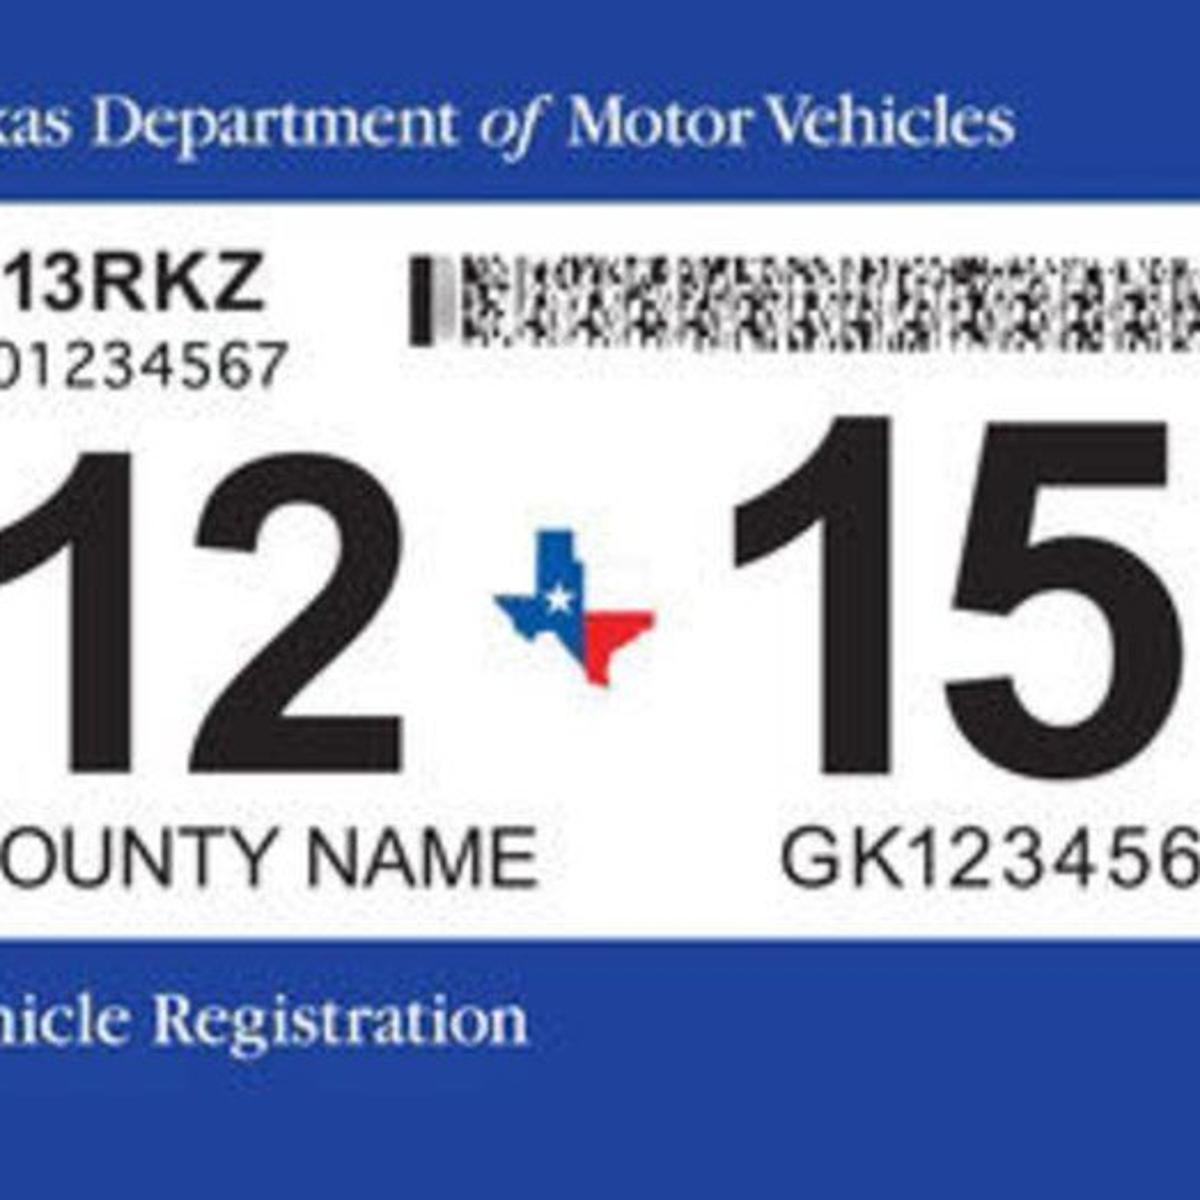 Phase Ii Of Dmv S Two Steps One Sticker Begins March 1 Local News Itemonline Com